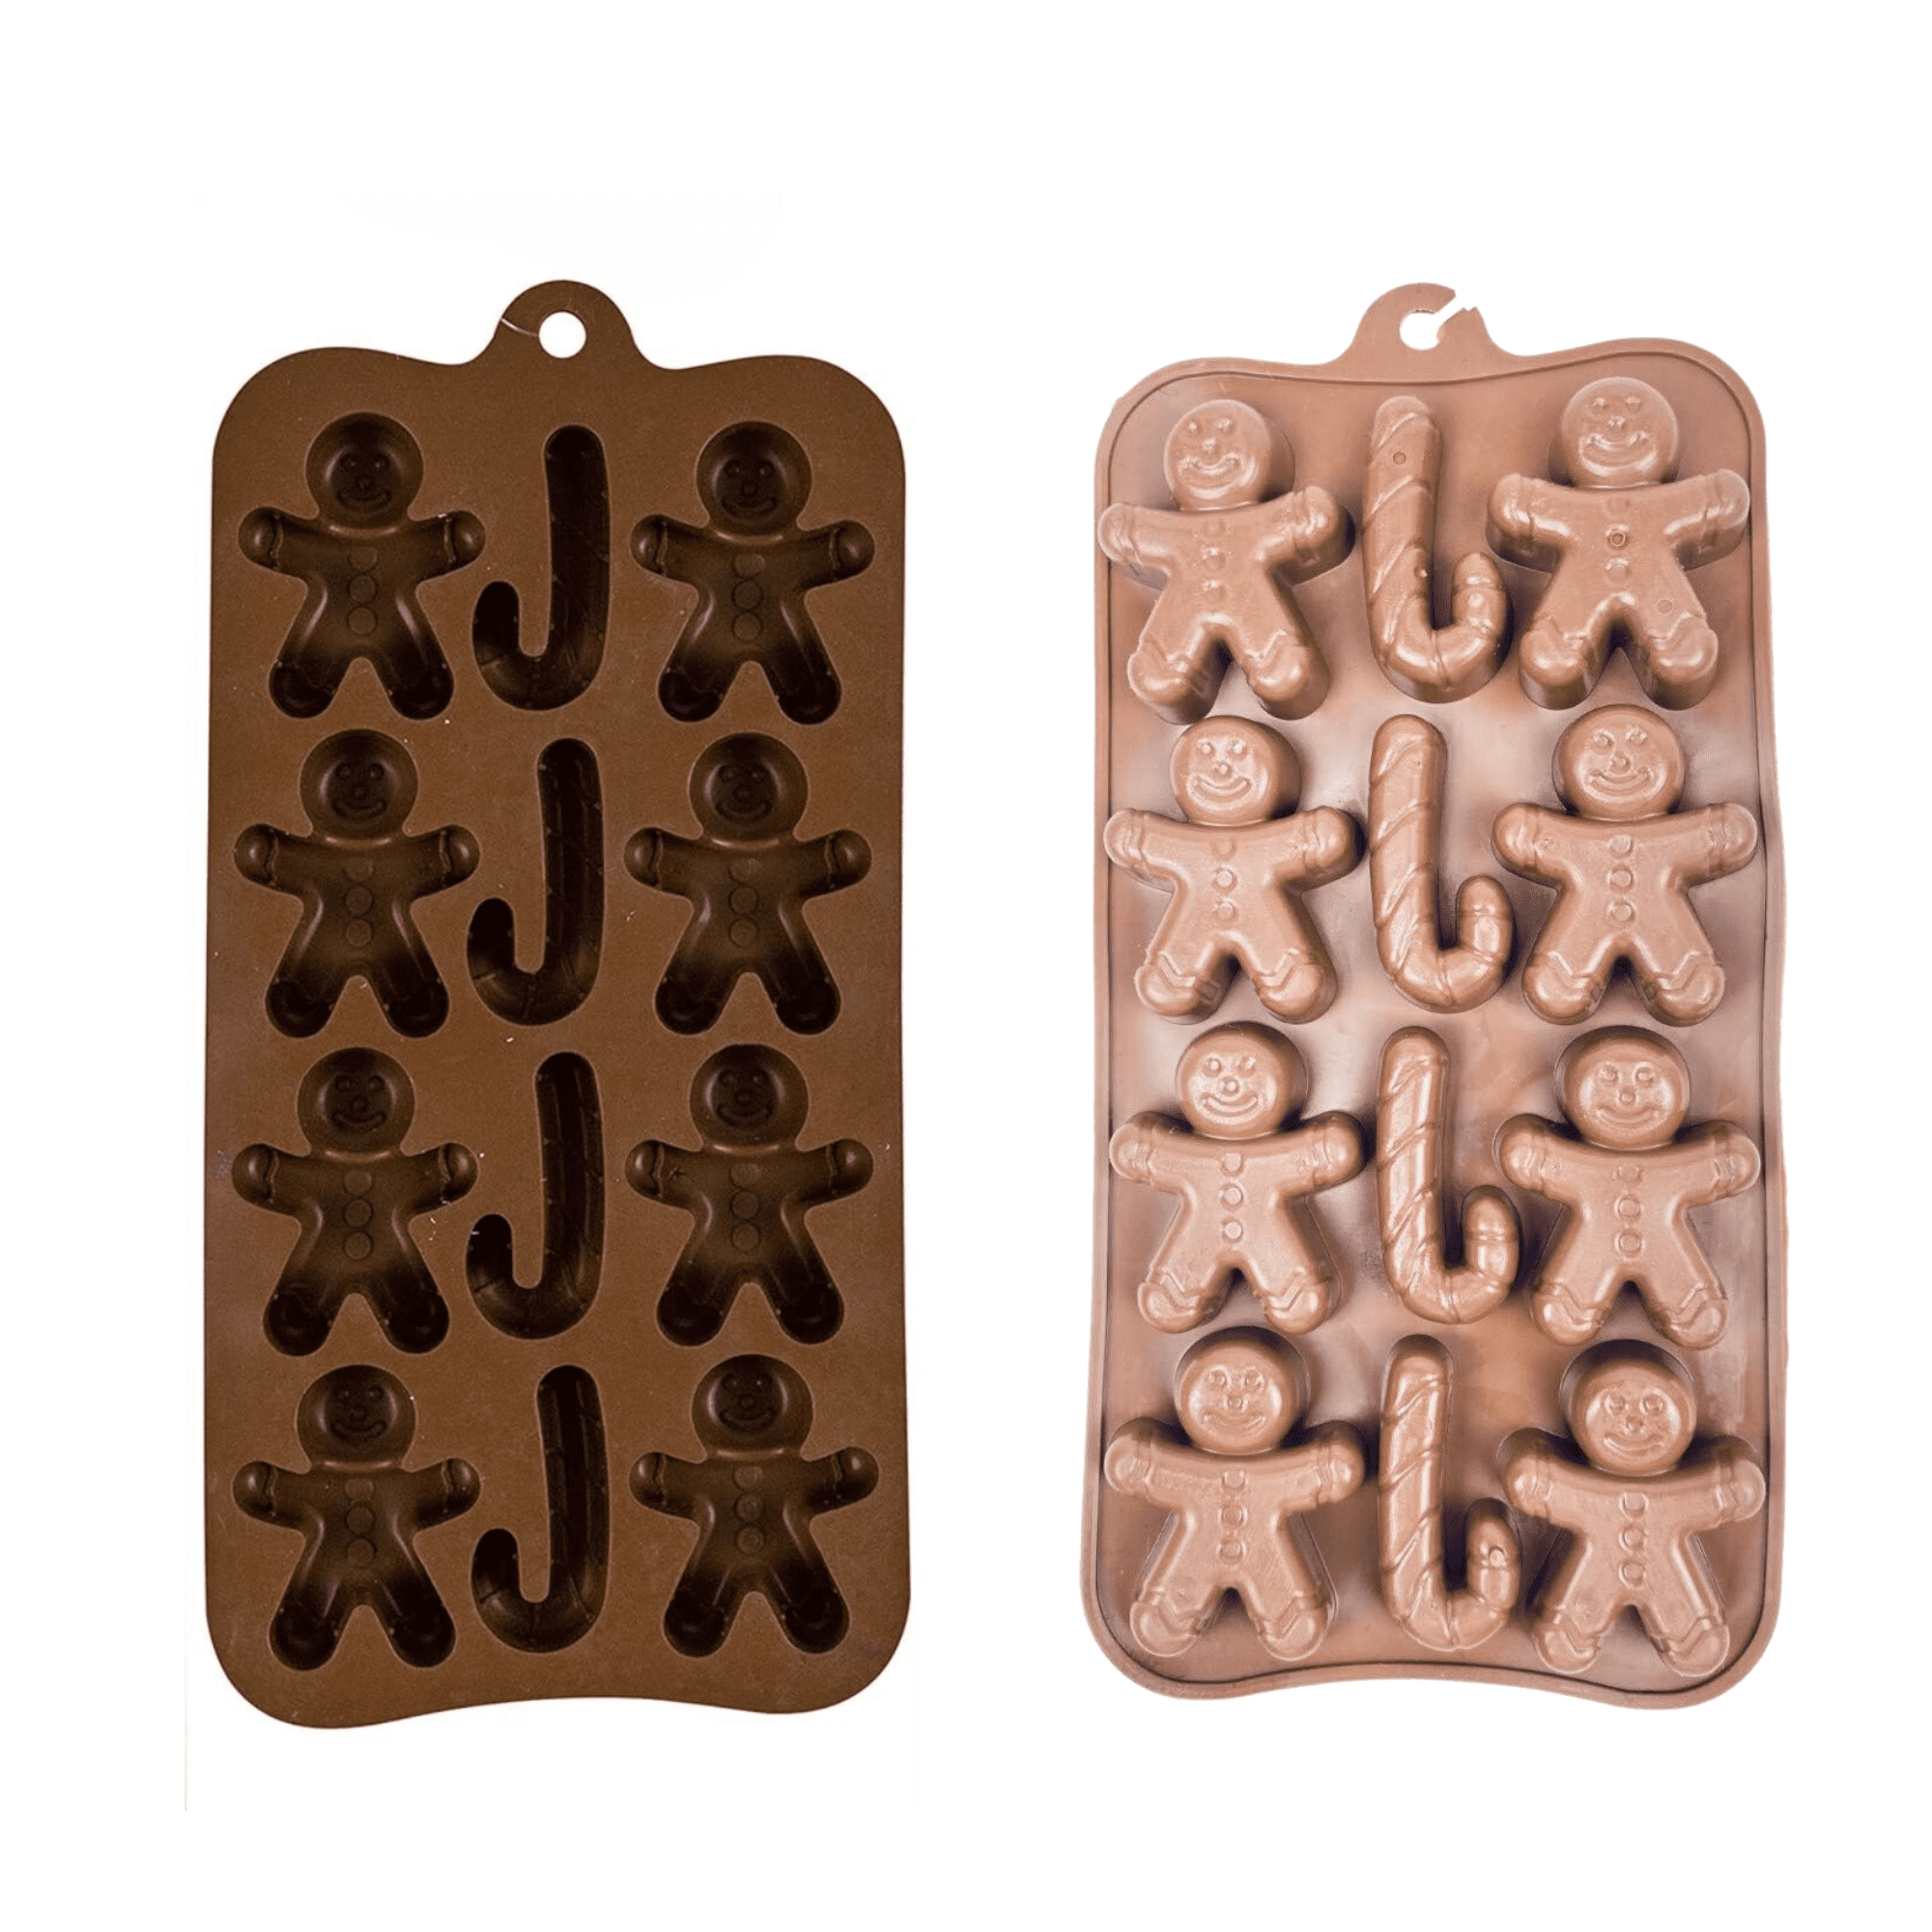 Set of 3 Holiday Christmas Shaped Silicone Ice Cube Soap Making Trays/Molds  - Gingerbread Men/Candy Canes, Snowflakes & Christmas Trees